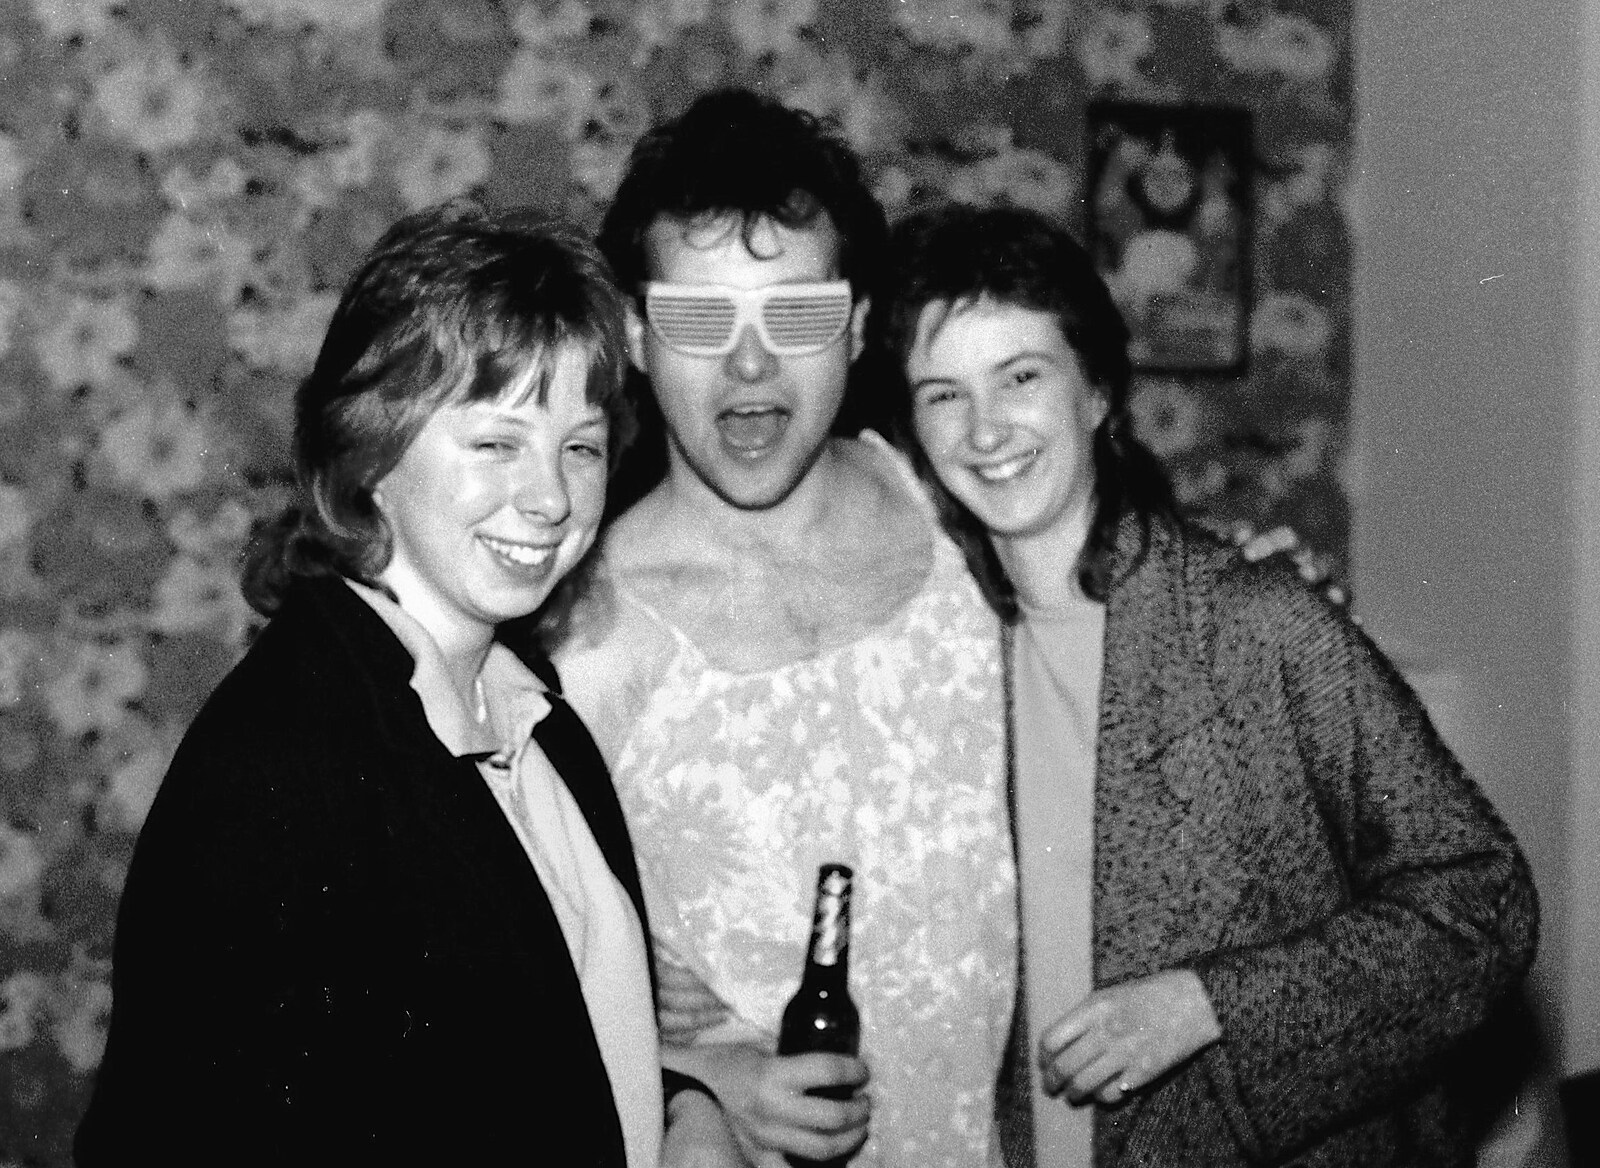 Ian Dunwoody in a dress from Uni: Simon Read's Party, North Road East, Plymouth - 10th October 1986